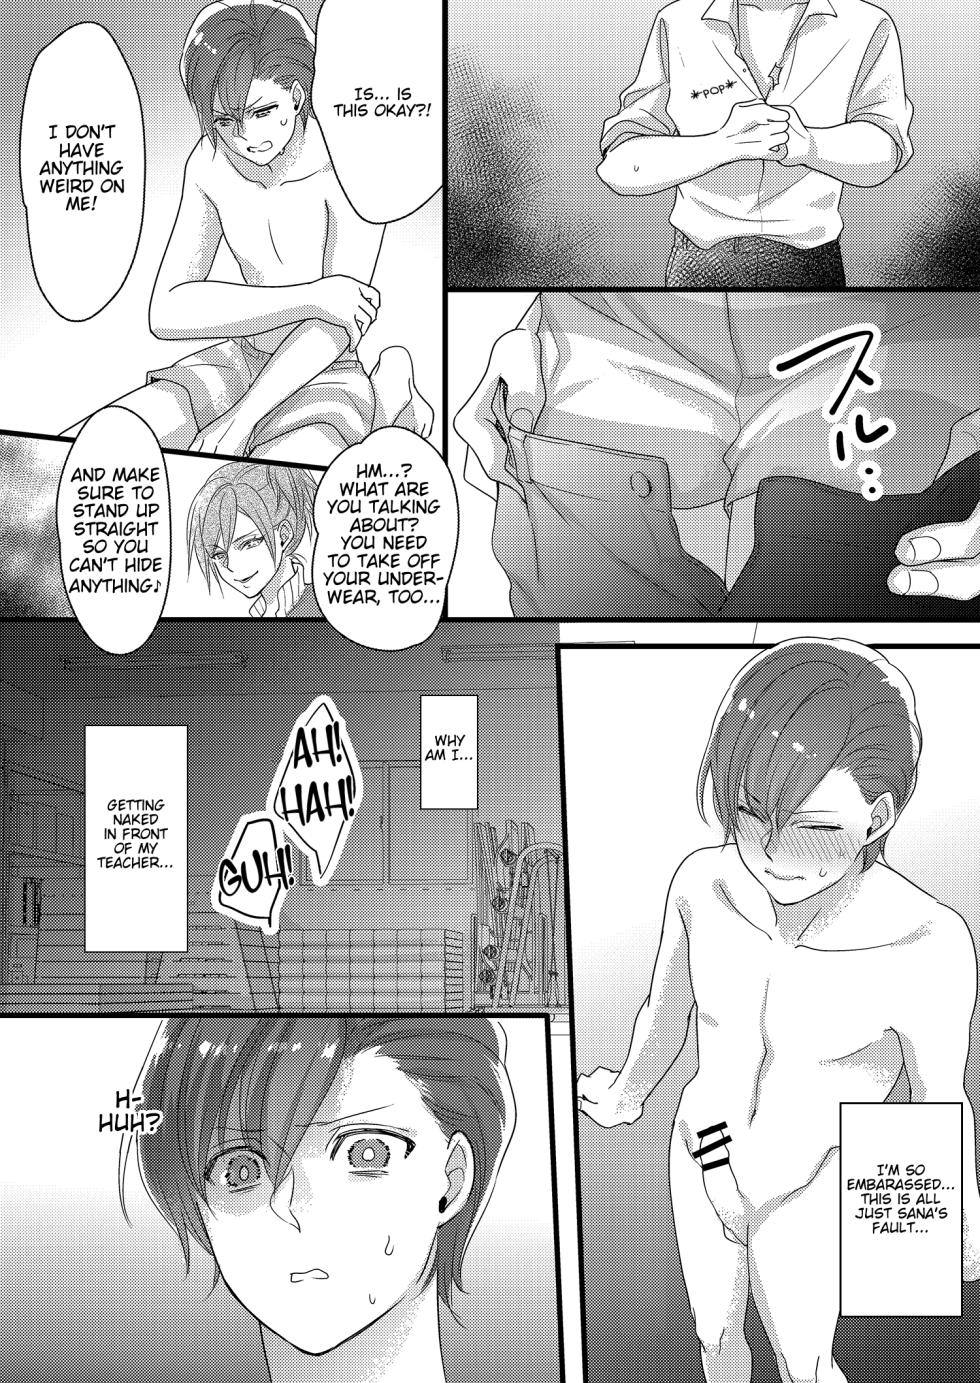 [Marialite (Lyna)] Haru to Sana 2 ～Love Connected Through Cosplay～[English] [Mikodayo] - Page 21